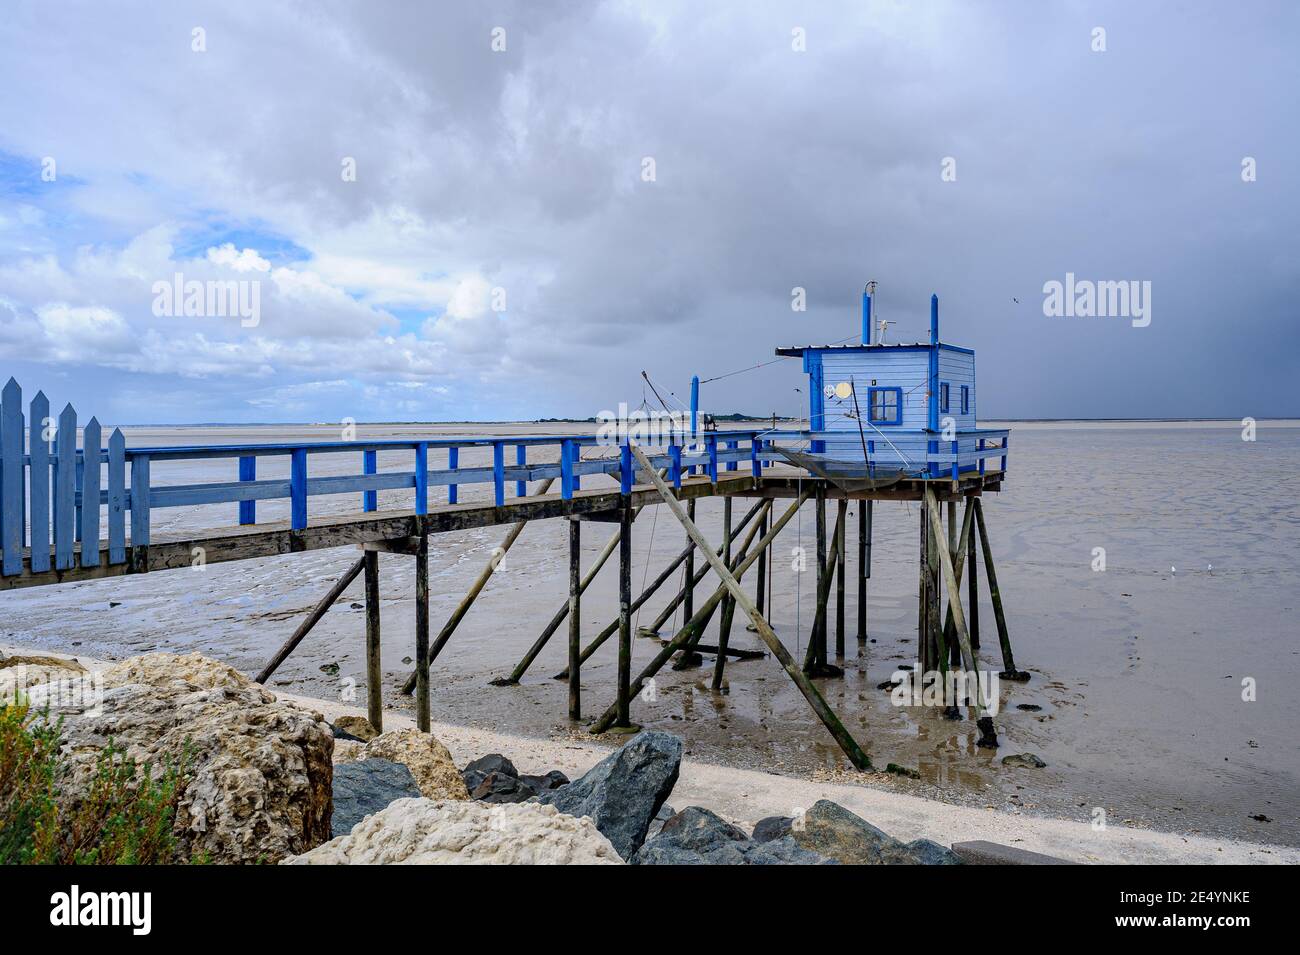 City of Fouras, Atlantic coast, France, A fisherman's hut perched on wooden stakes. These huts are used for plaice fishing. Stock Photo